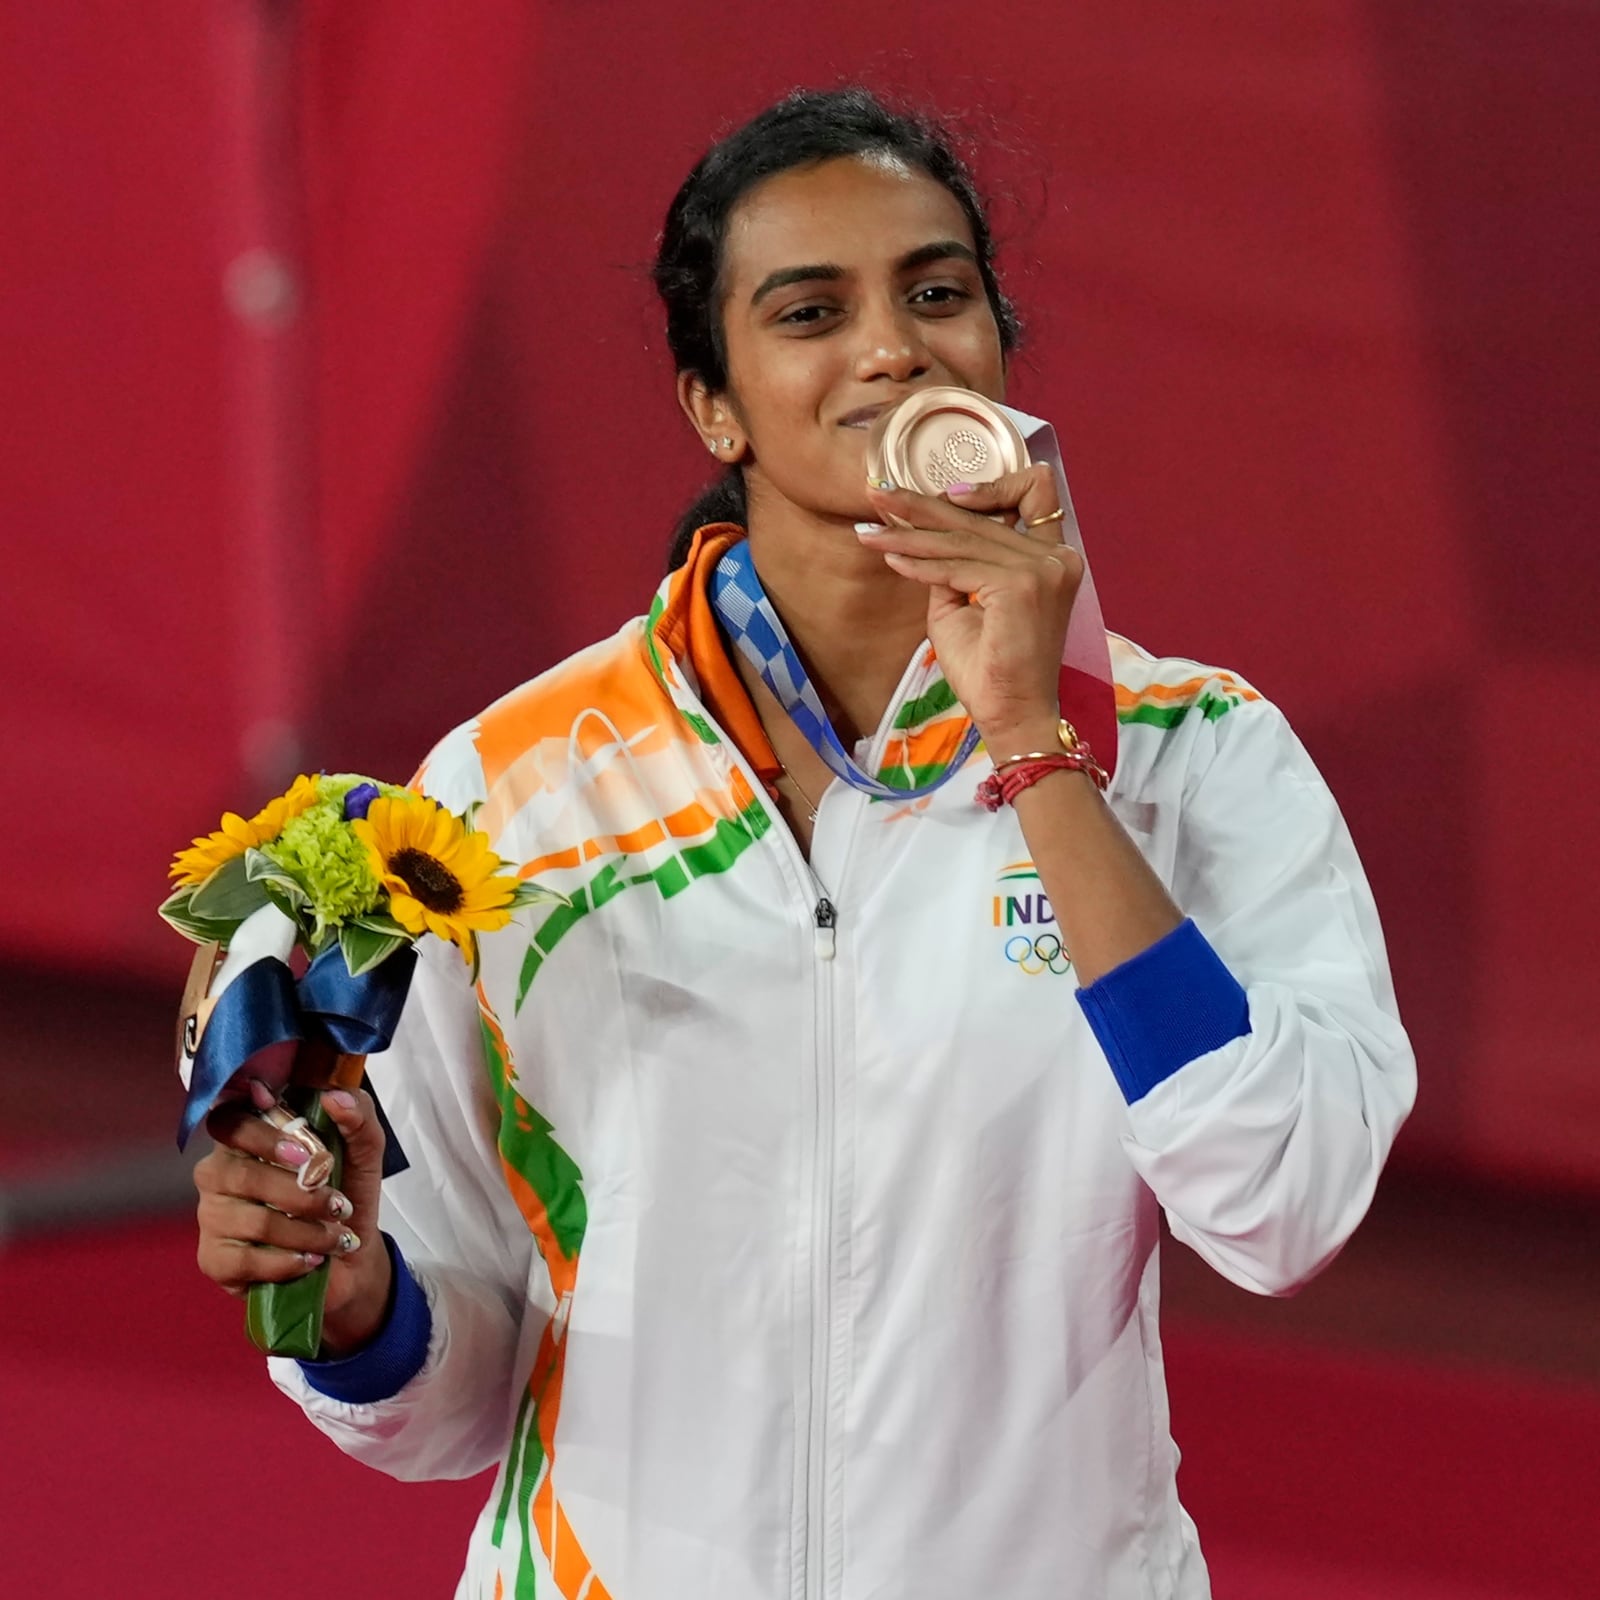 PV Sindhu @pvsindhu1 made India proud by clinching the gold medal at the  Commonwealth Games. But wait, clinch? Learn the meaning of this…